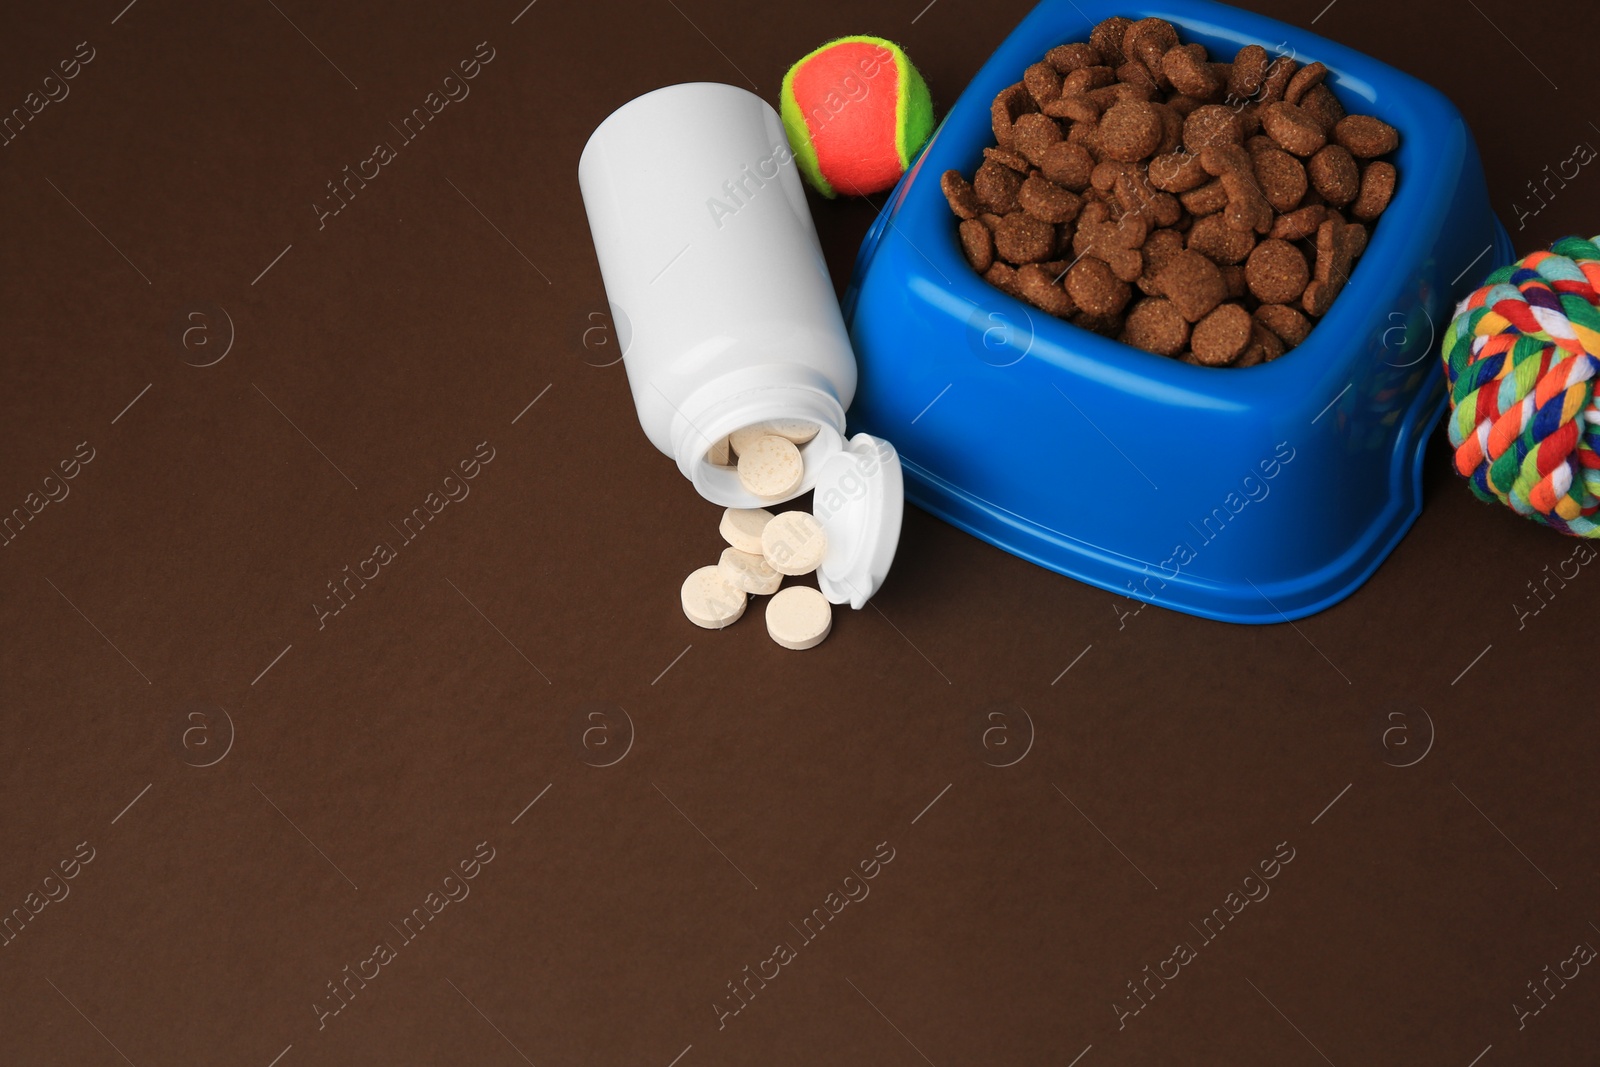 Photo of Bowl with dry pet food, bottle of vitamins and toys on brown background. Space for text